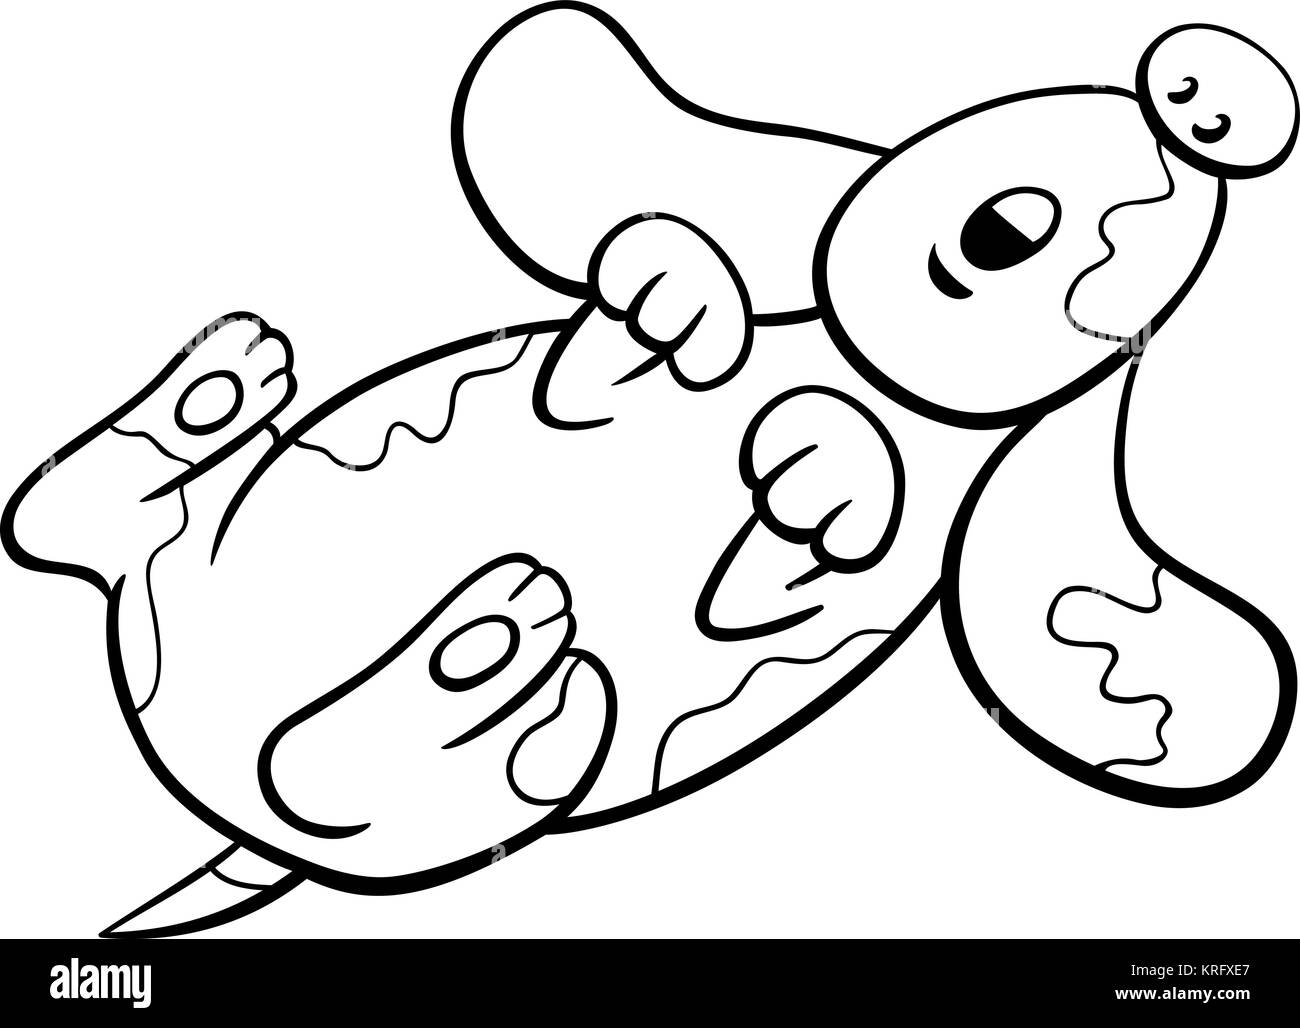 Black and White Cartoon Illustration of Cute Little Dog or Puppy Animal Character for Coloring Book Stock Vector